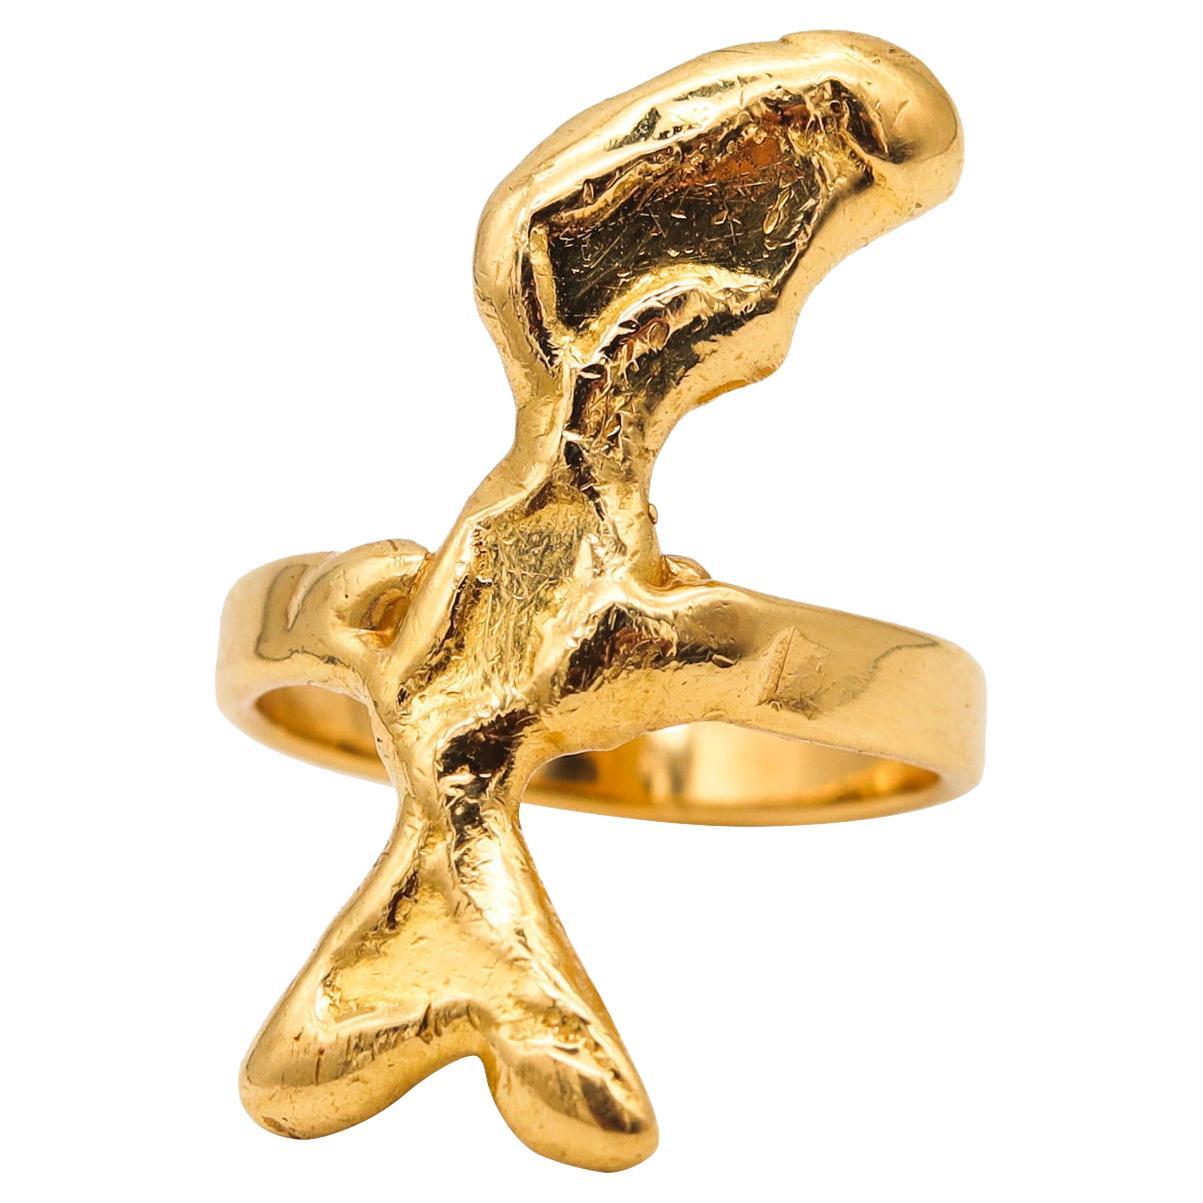 Jean Mahie 1970 Paris Sculptural Abstract Ring in Textured 22Kt Yellow Gold